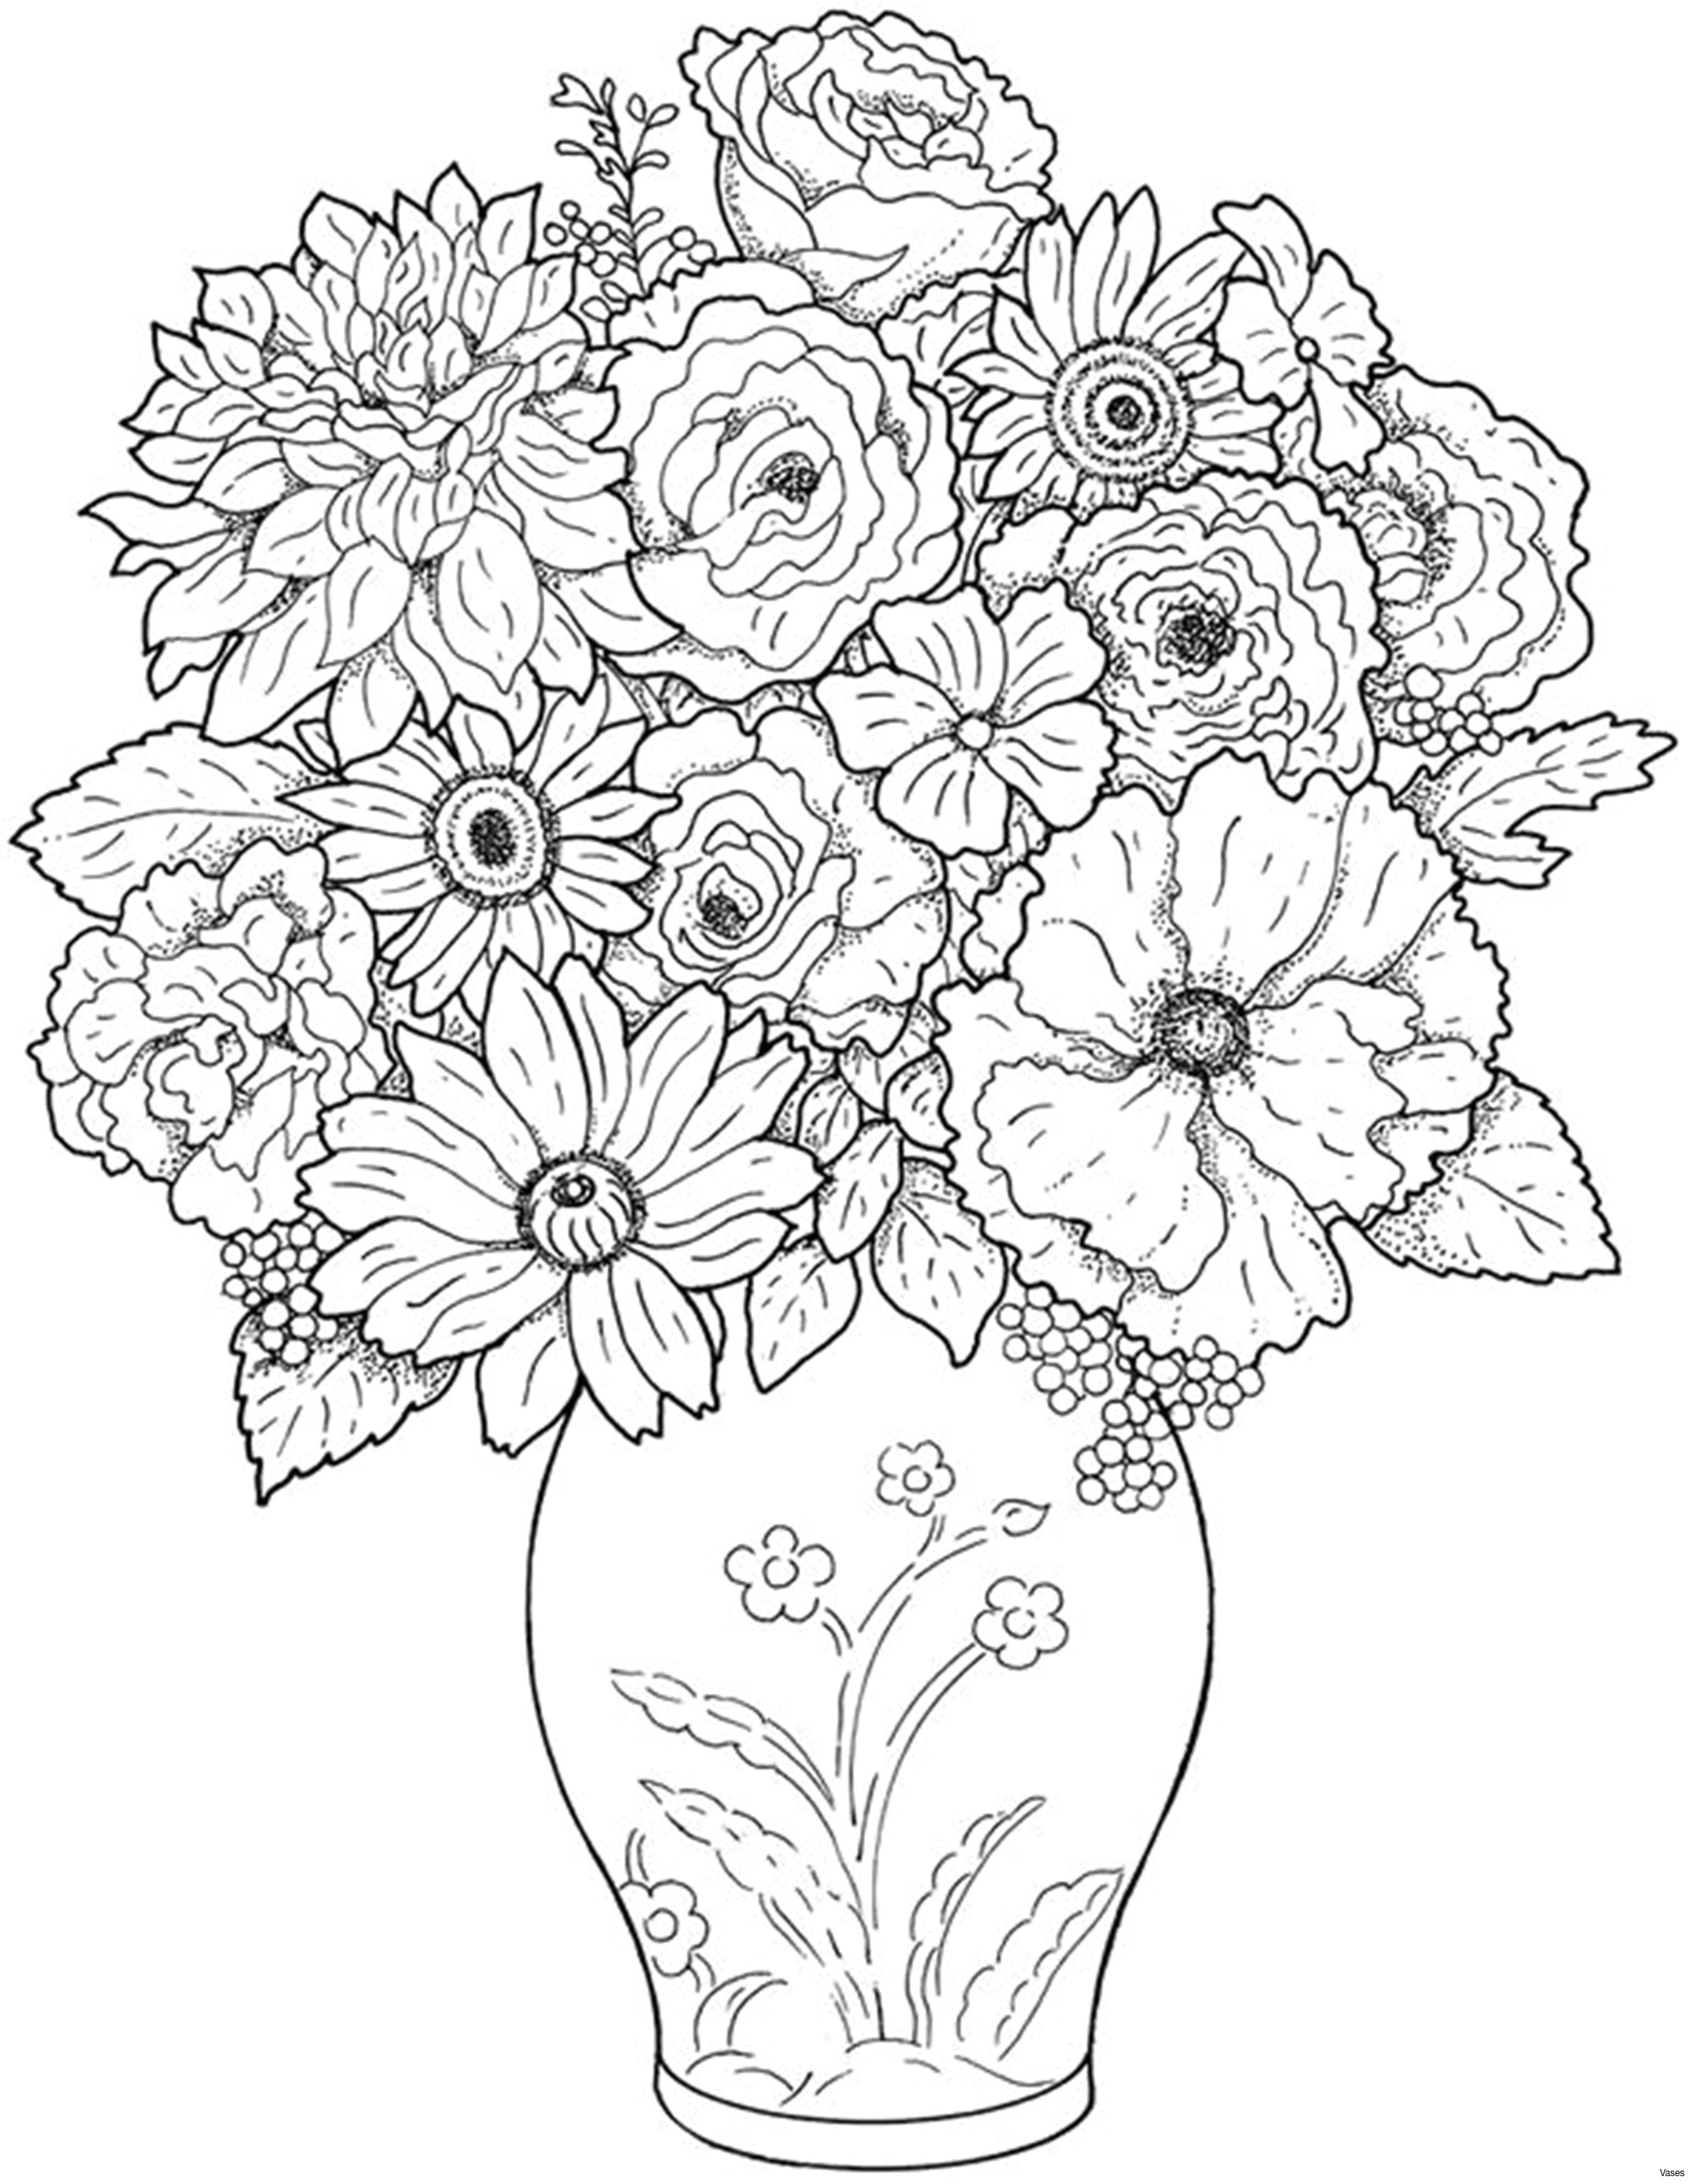 Drawing Of Flowers Black and White Www Colouring Pages Aua Ergewohnliche Cool Vases Flower Vase Coloring